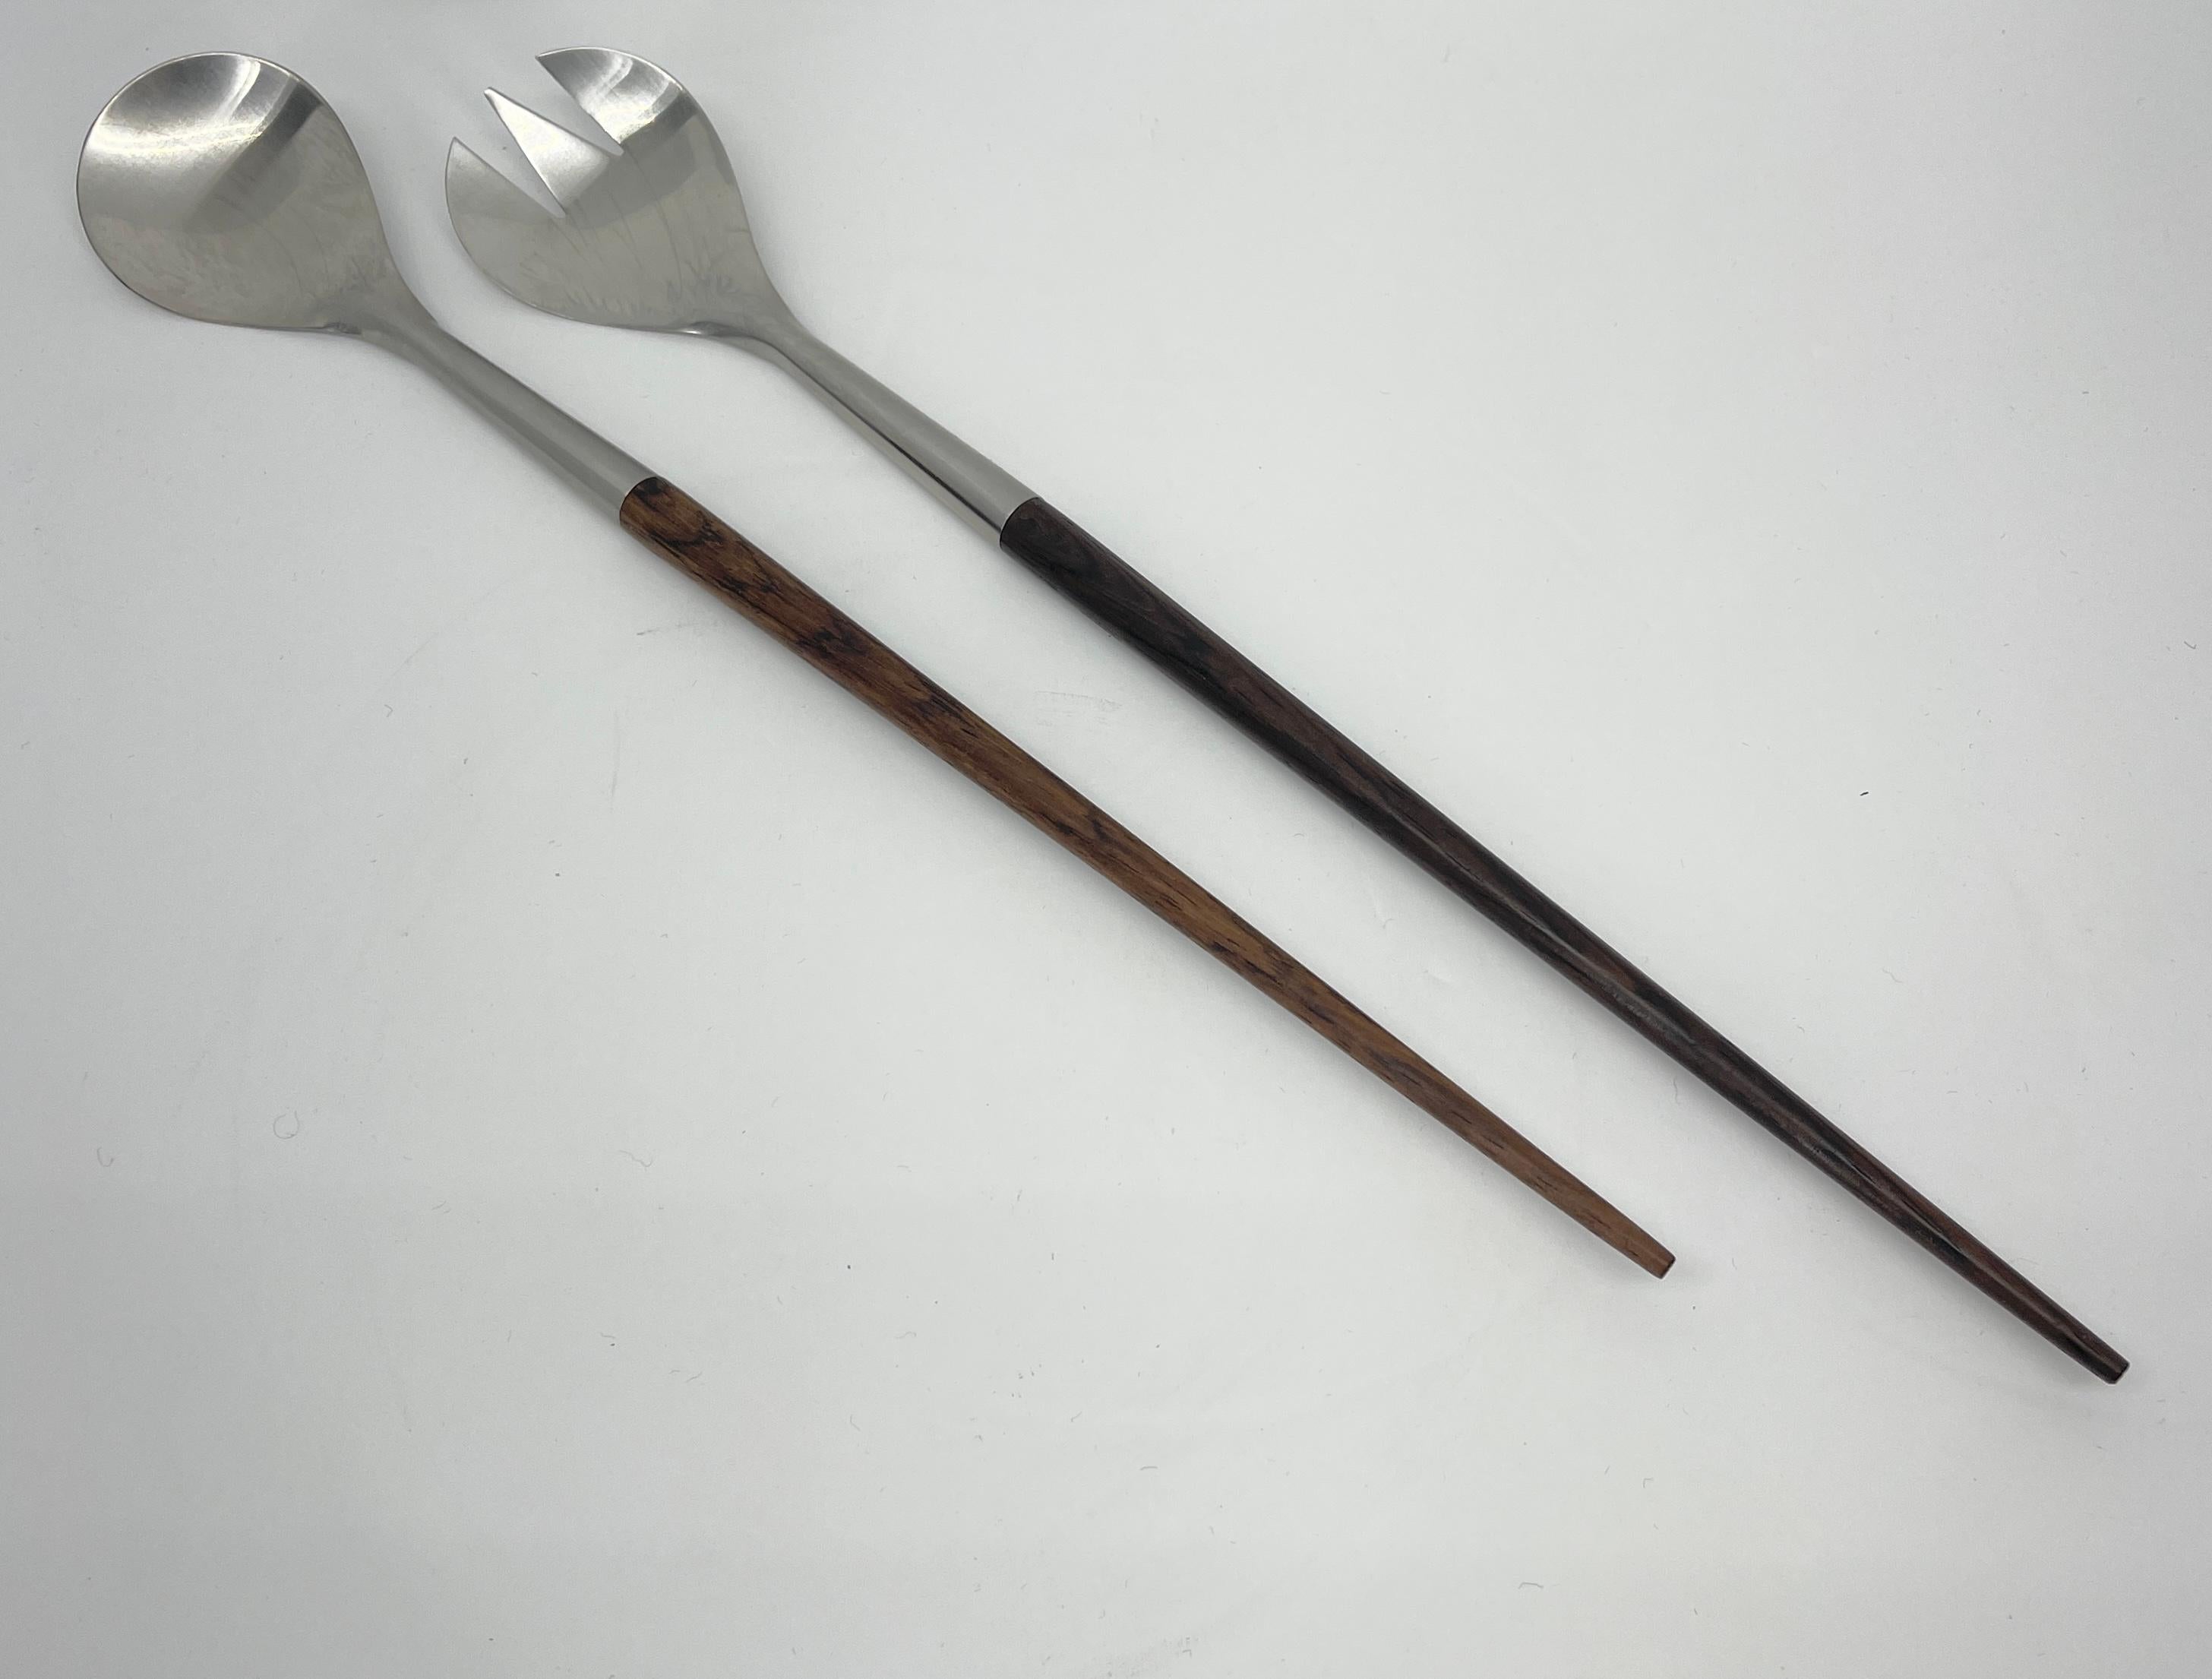 Danish teak and stainless steel salad tongs, Mid-Century Modern. Classic lean and clean set of salad serving tongs are perfect serving pieces for your modern serving needs. Beautiful warm wood and stainless steel, these tongs have many functions and